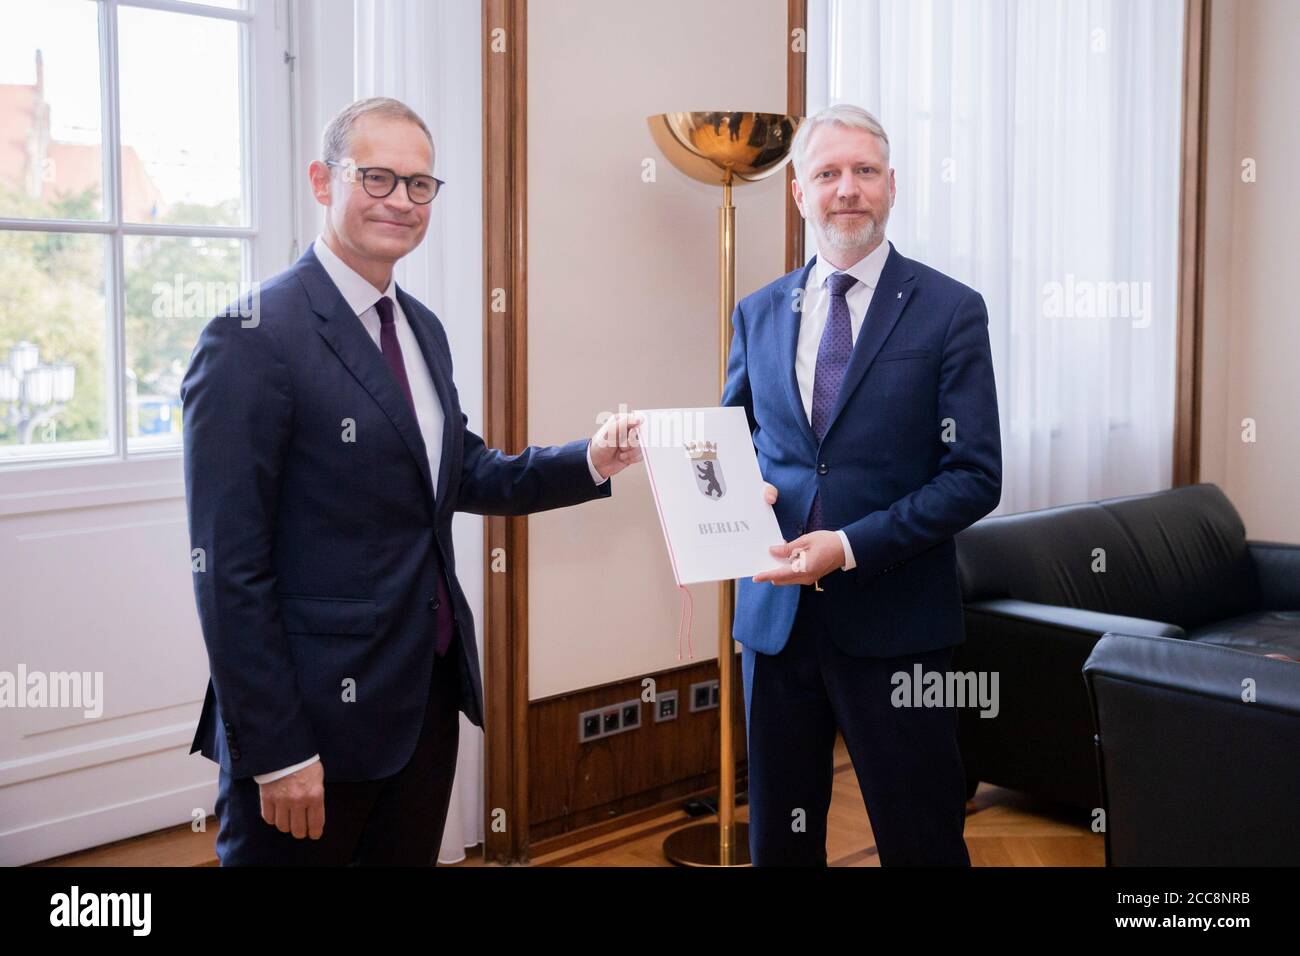 Berlin, Germany. 20th Aug, 2020. Michael Müller (SPD, l), Governing Mayor of Berlin, hands over the certificate of appointment to Sebastian Scheel (Die Linke), designated Senator for Urban Development of Berlin, in his office in the Red City Hall. Scheel succeeds the resigned urban development senator Lompscher. Credit: Christoph Soeder/dpa/Alamy Live News Stock Photo